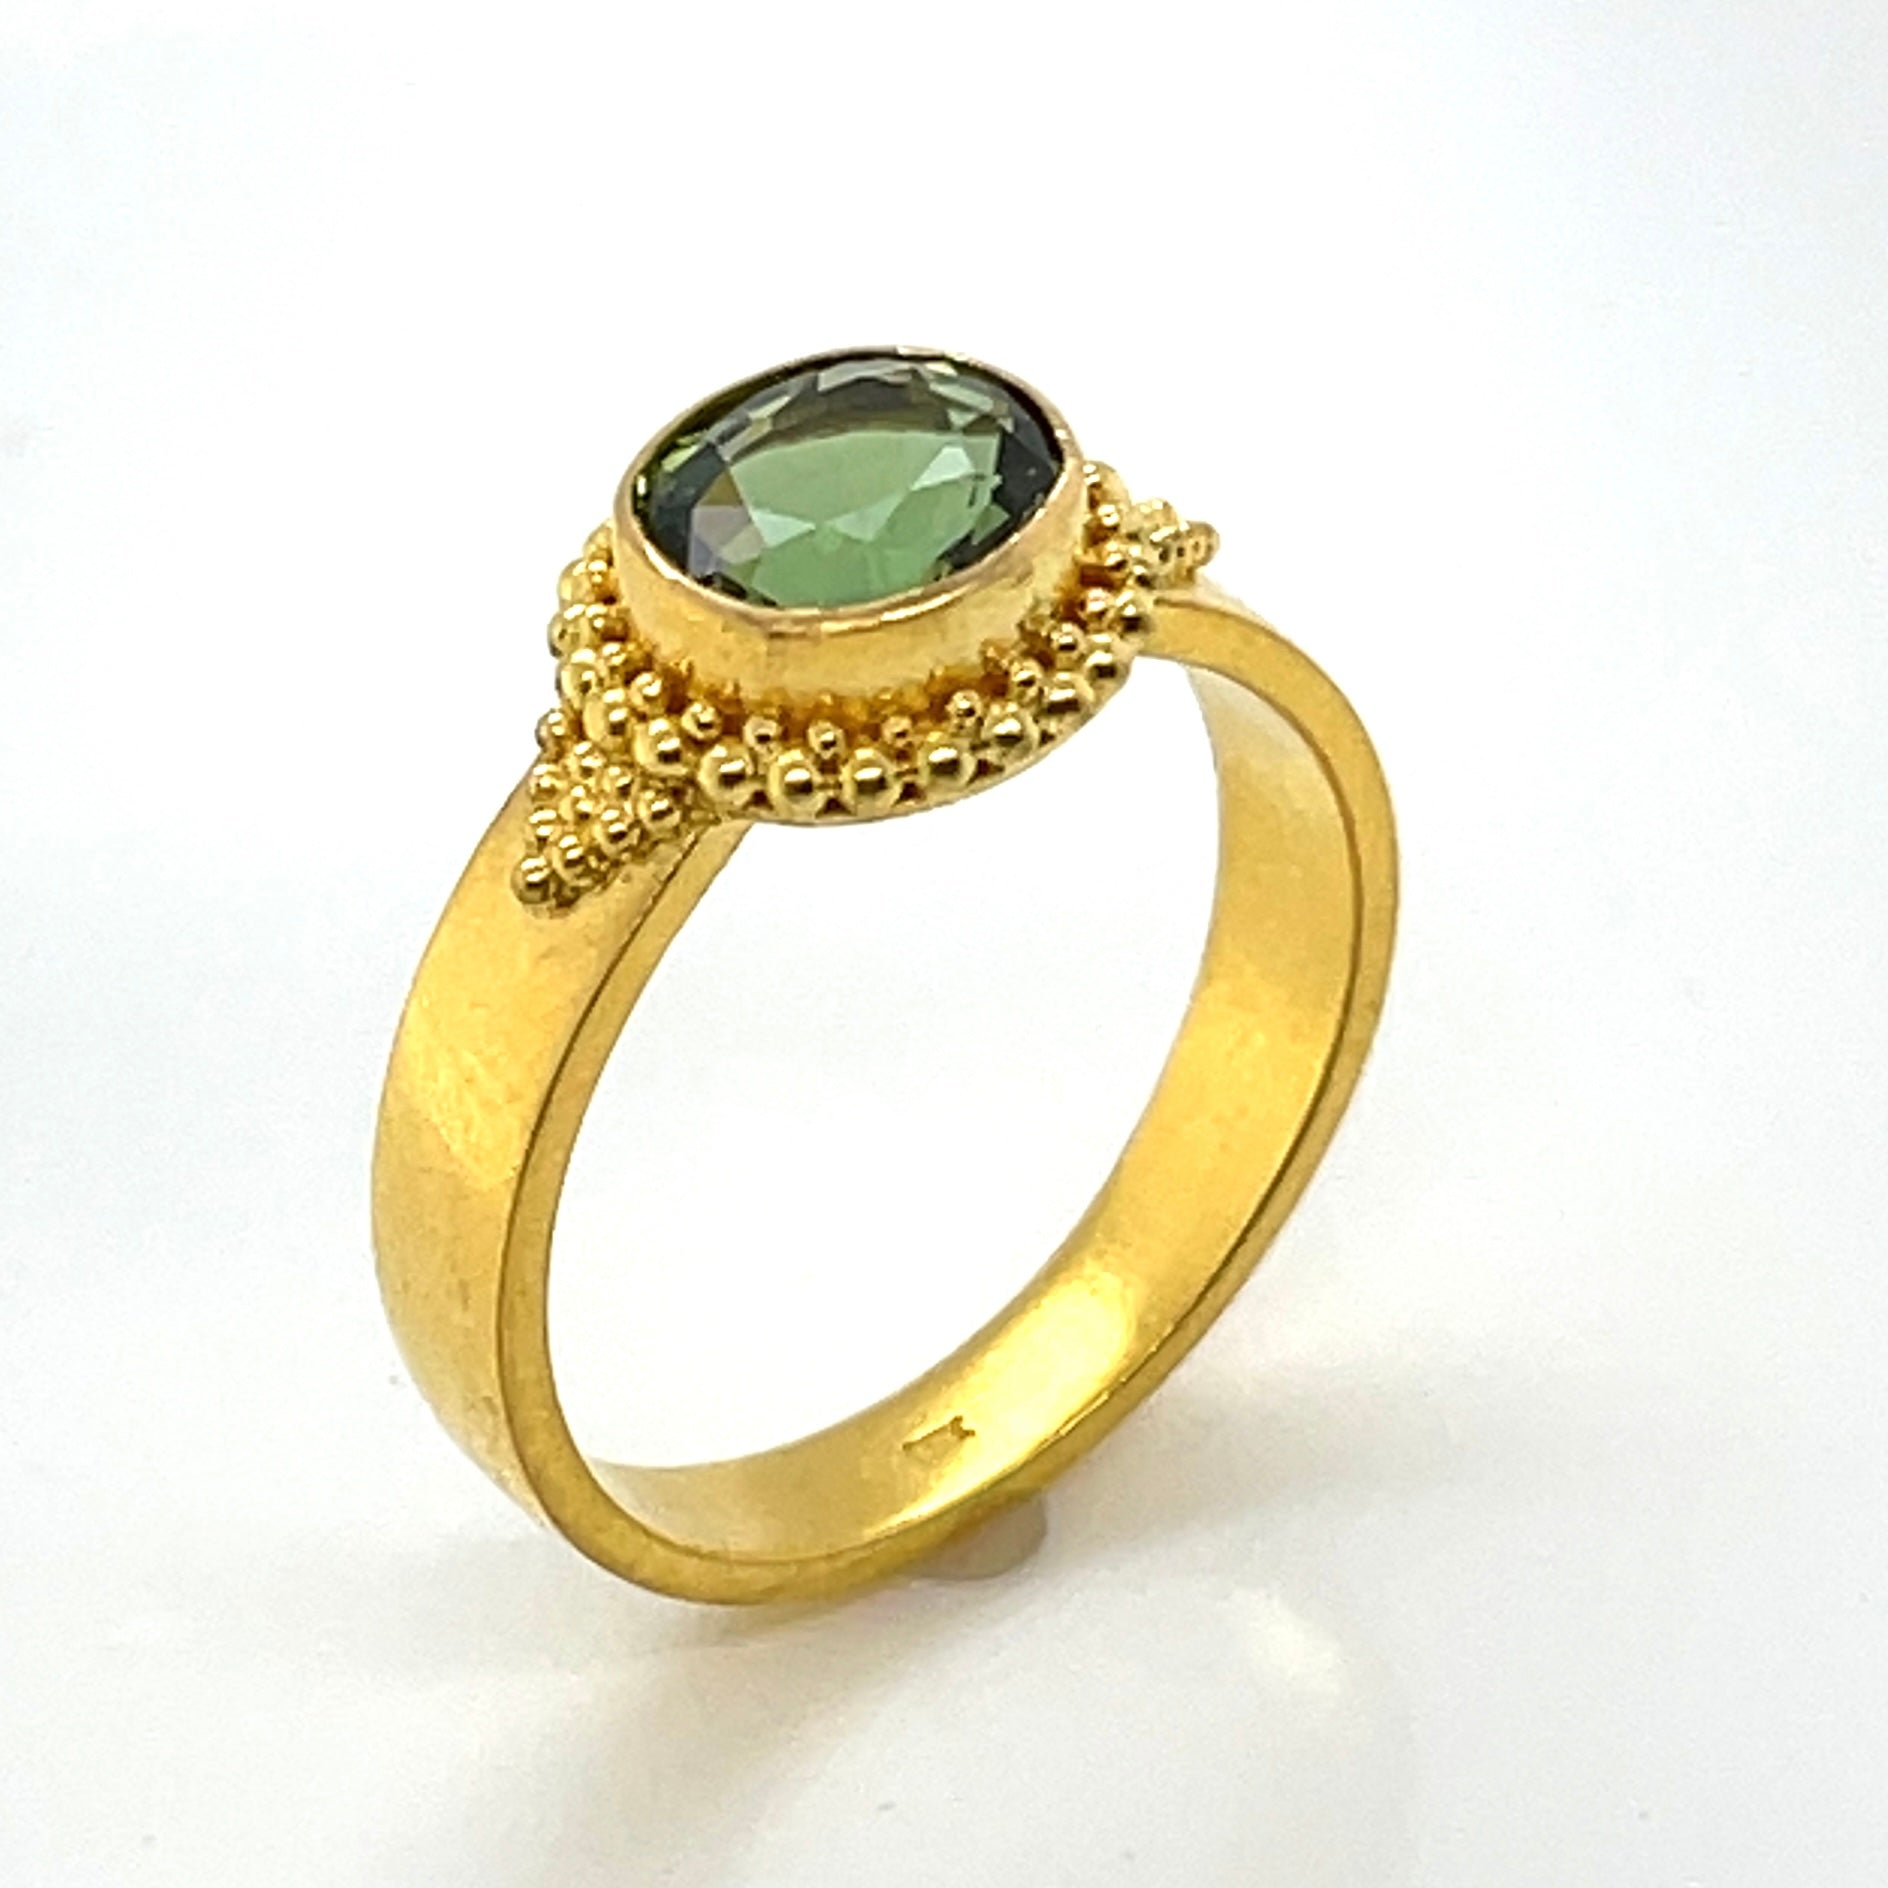 Green oval sapphire ring